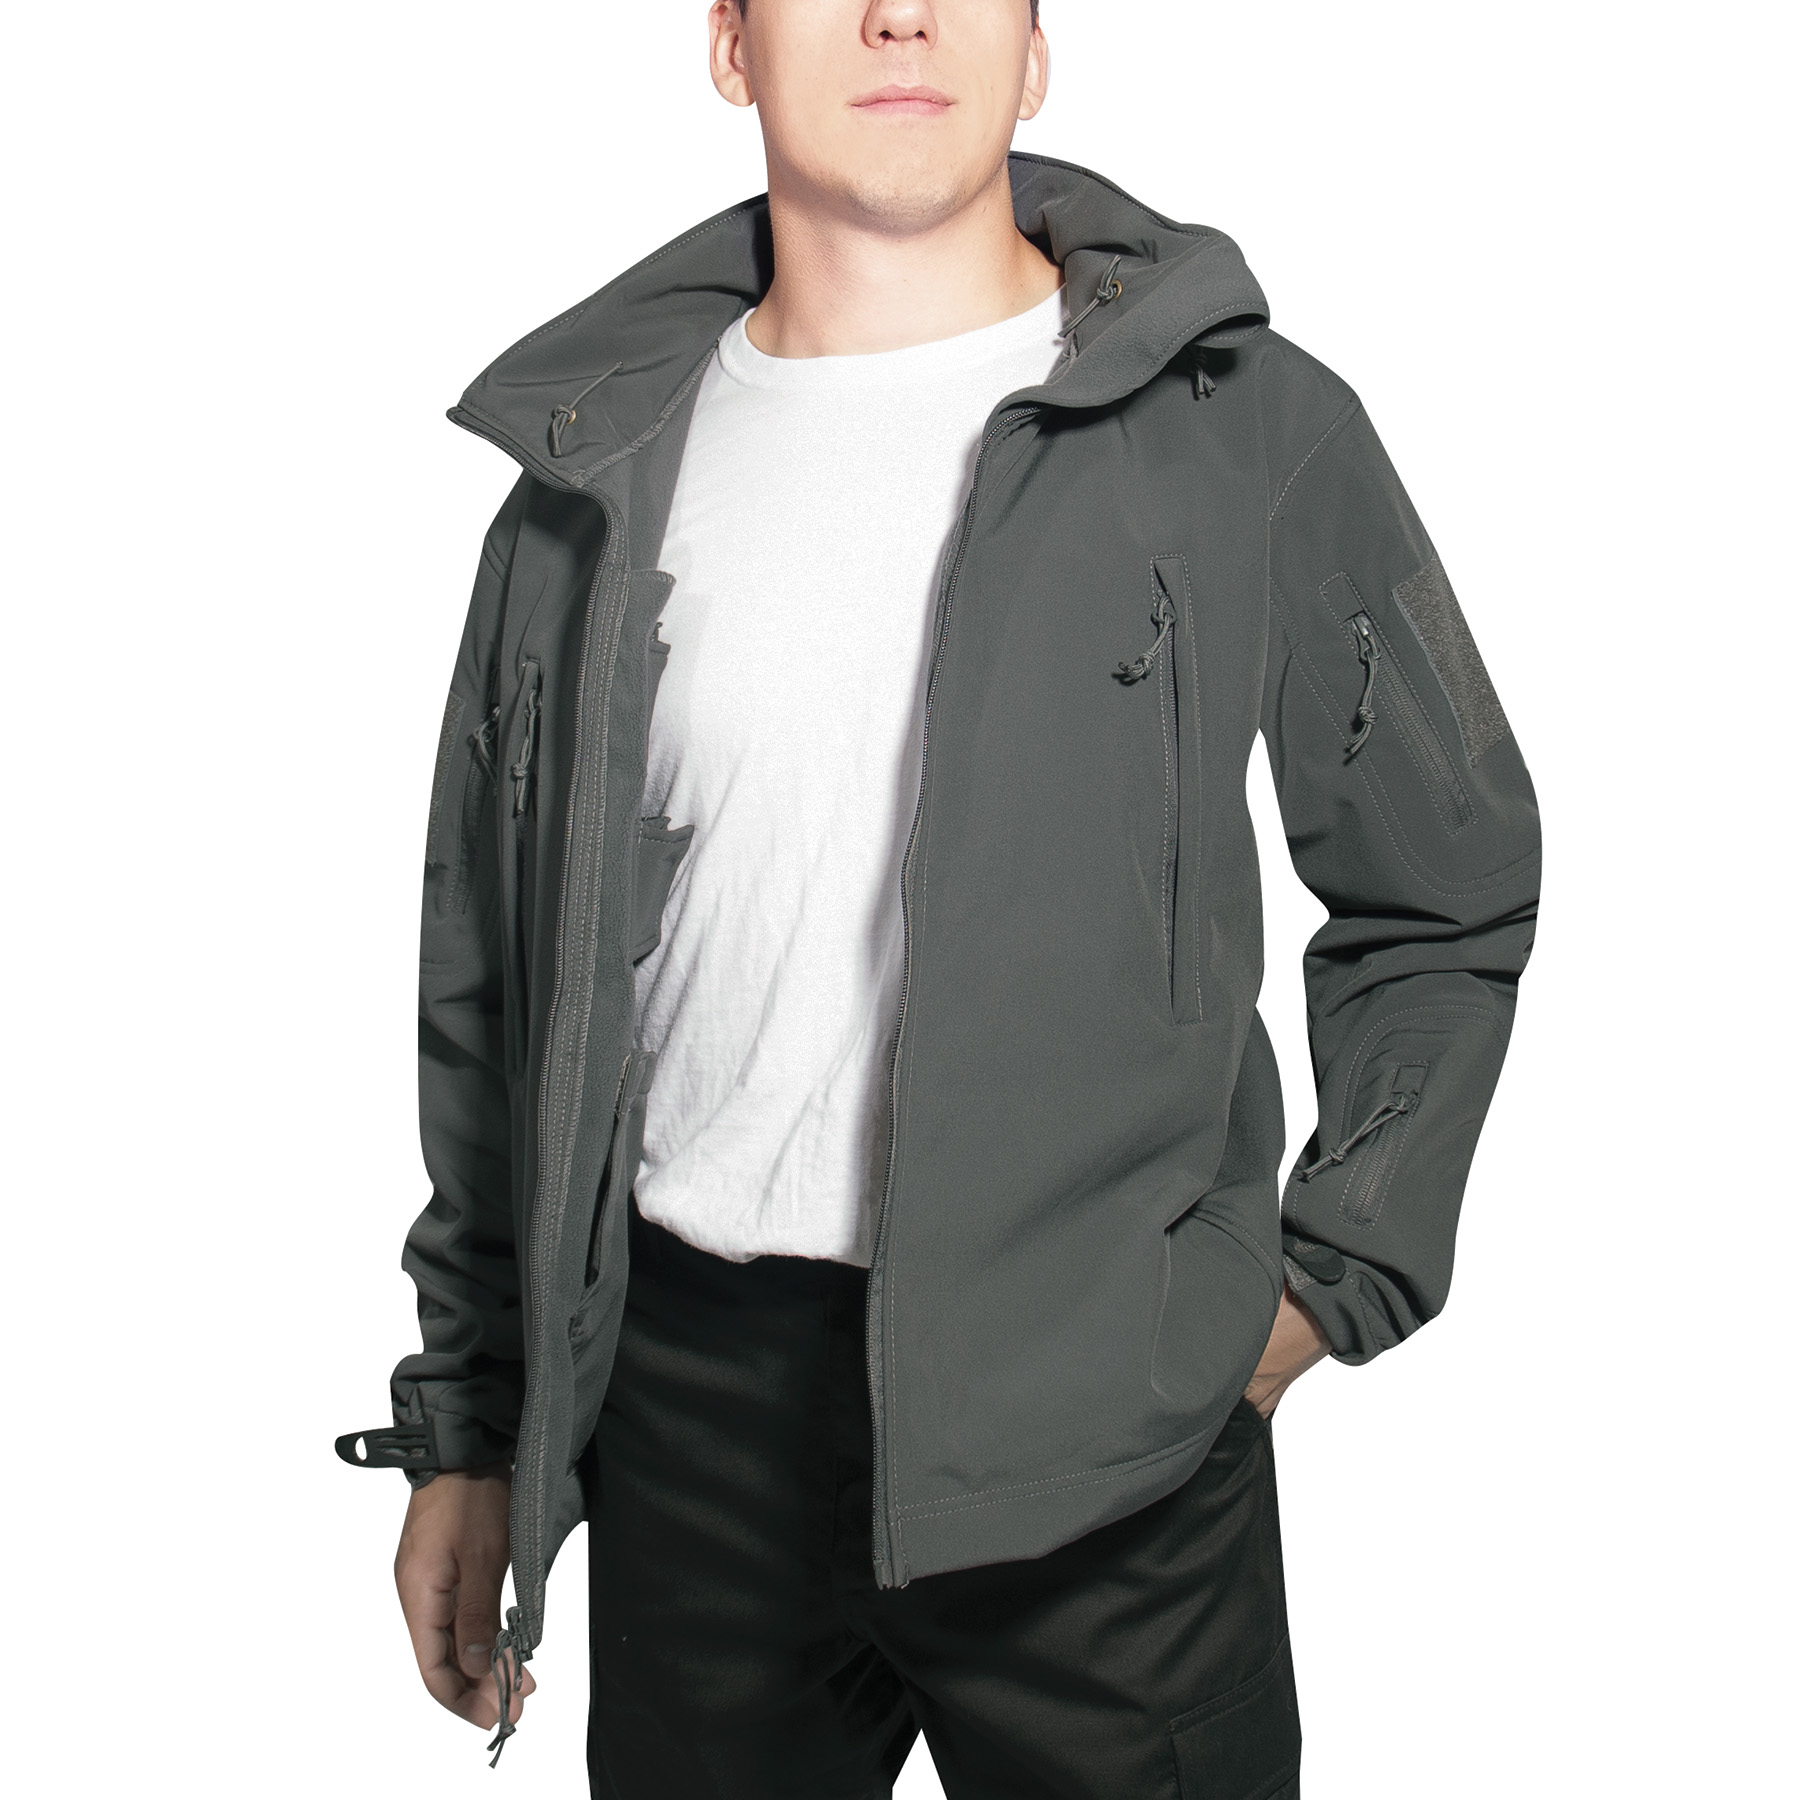 Rothco Concealed Carry Soft Shell Jacket - Volcanic Bikes